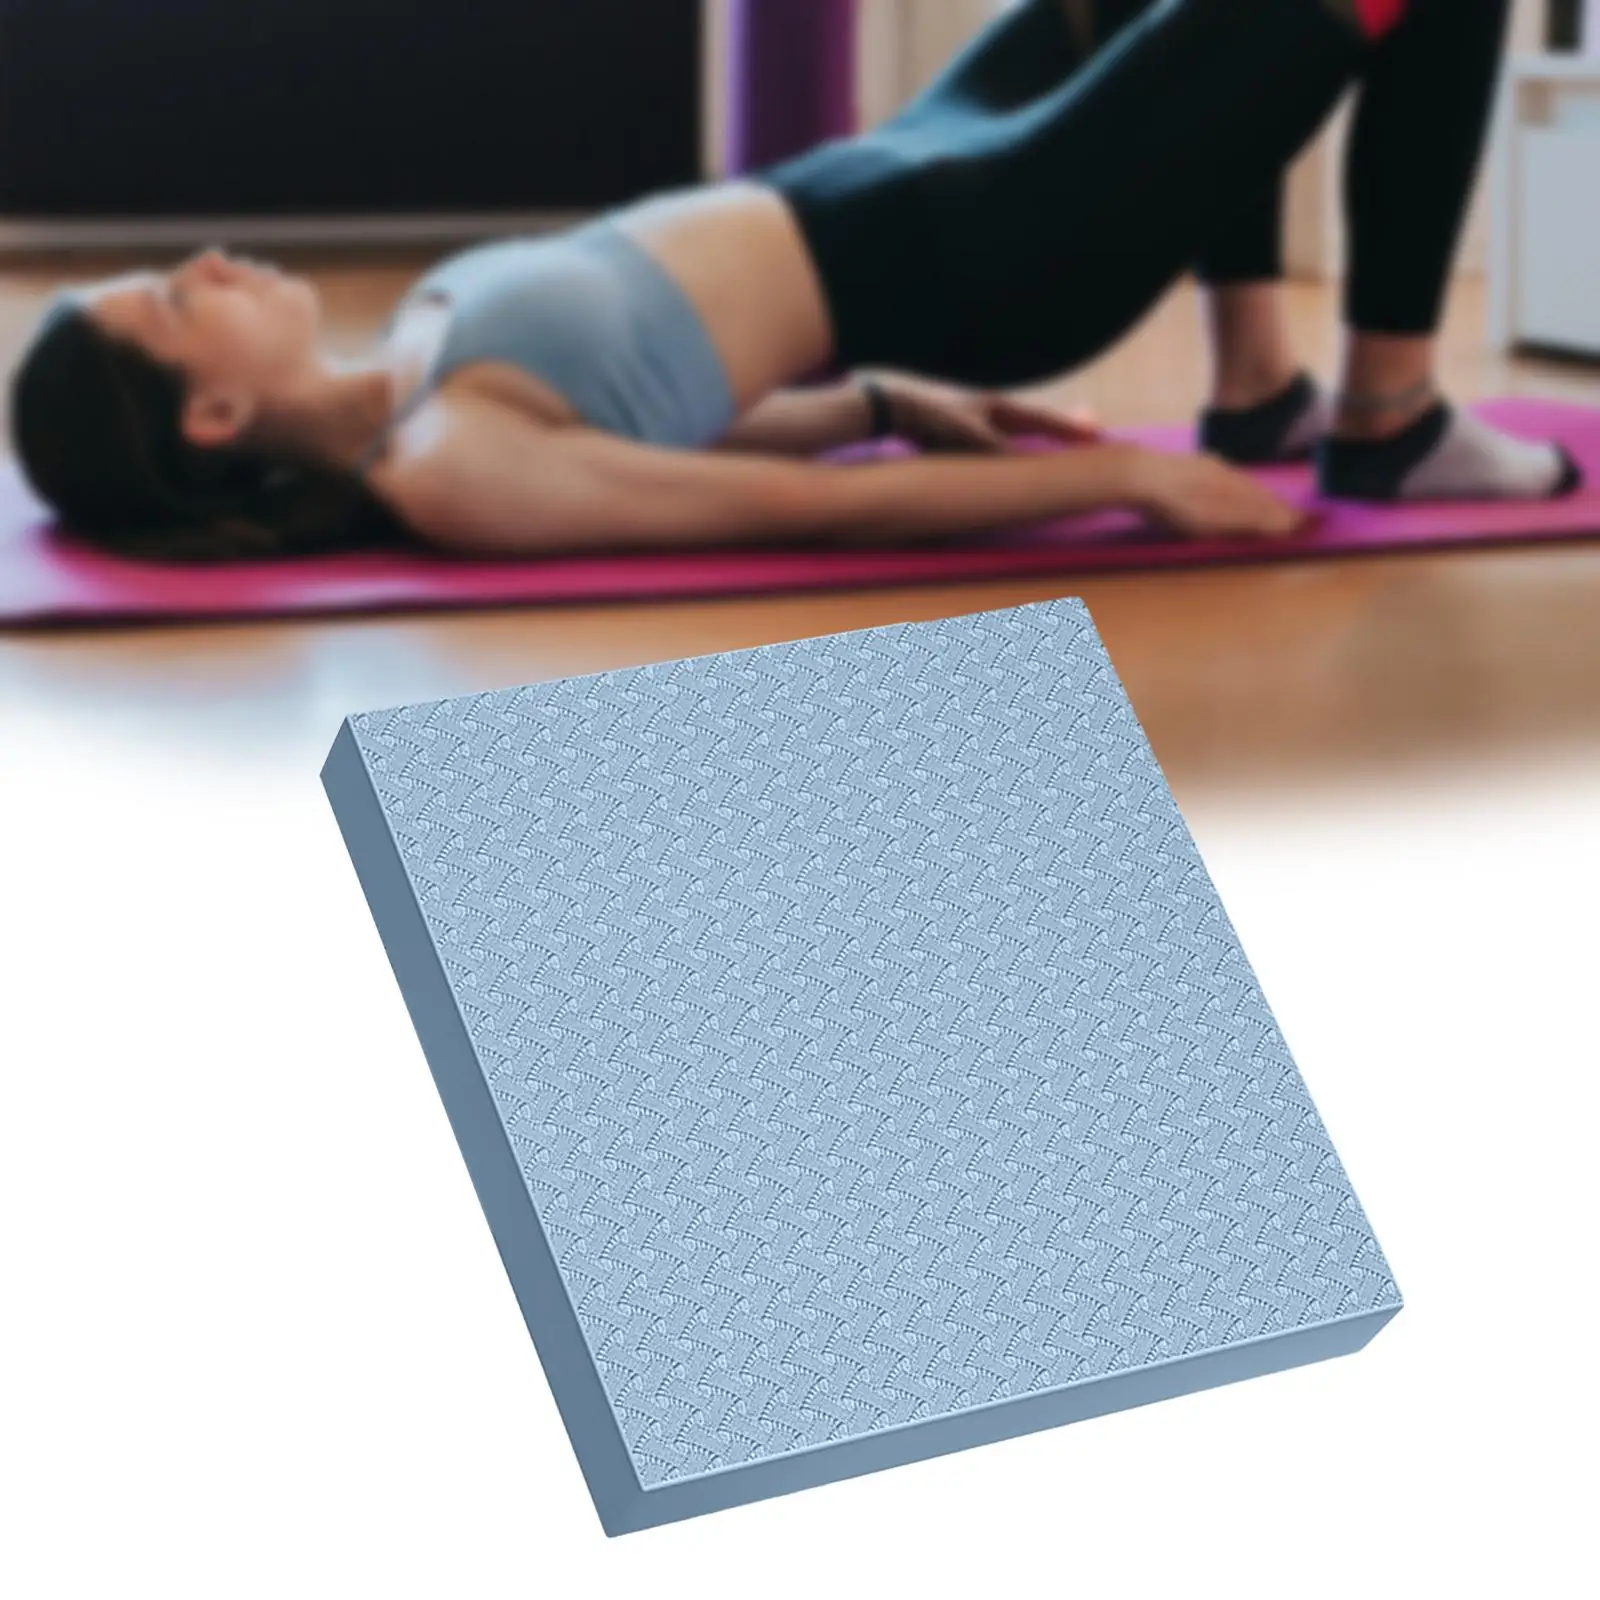 Exercise Balance Pad Durable Nonslip Cushion Lightweight Stability Trainer